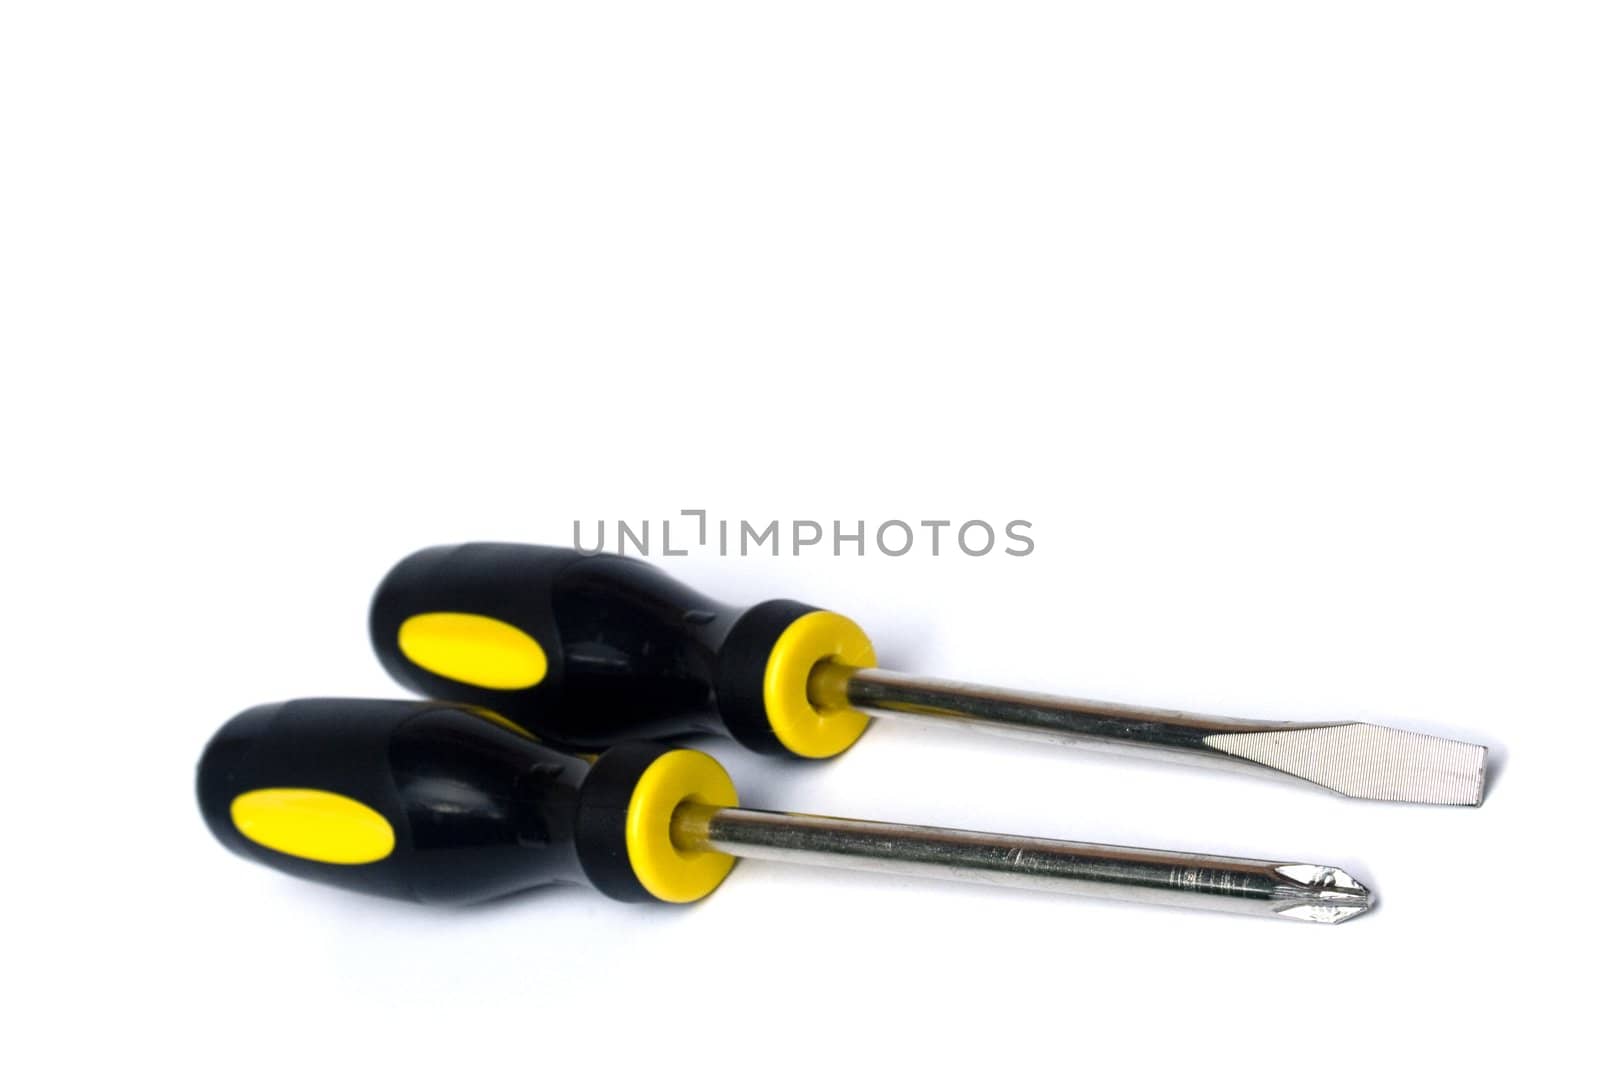 Yellow and black handled screwdrivers on white background